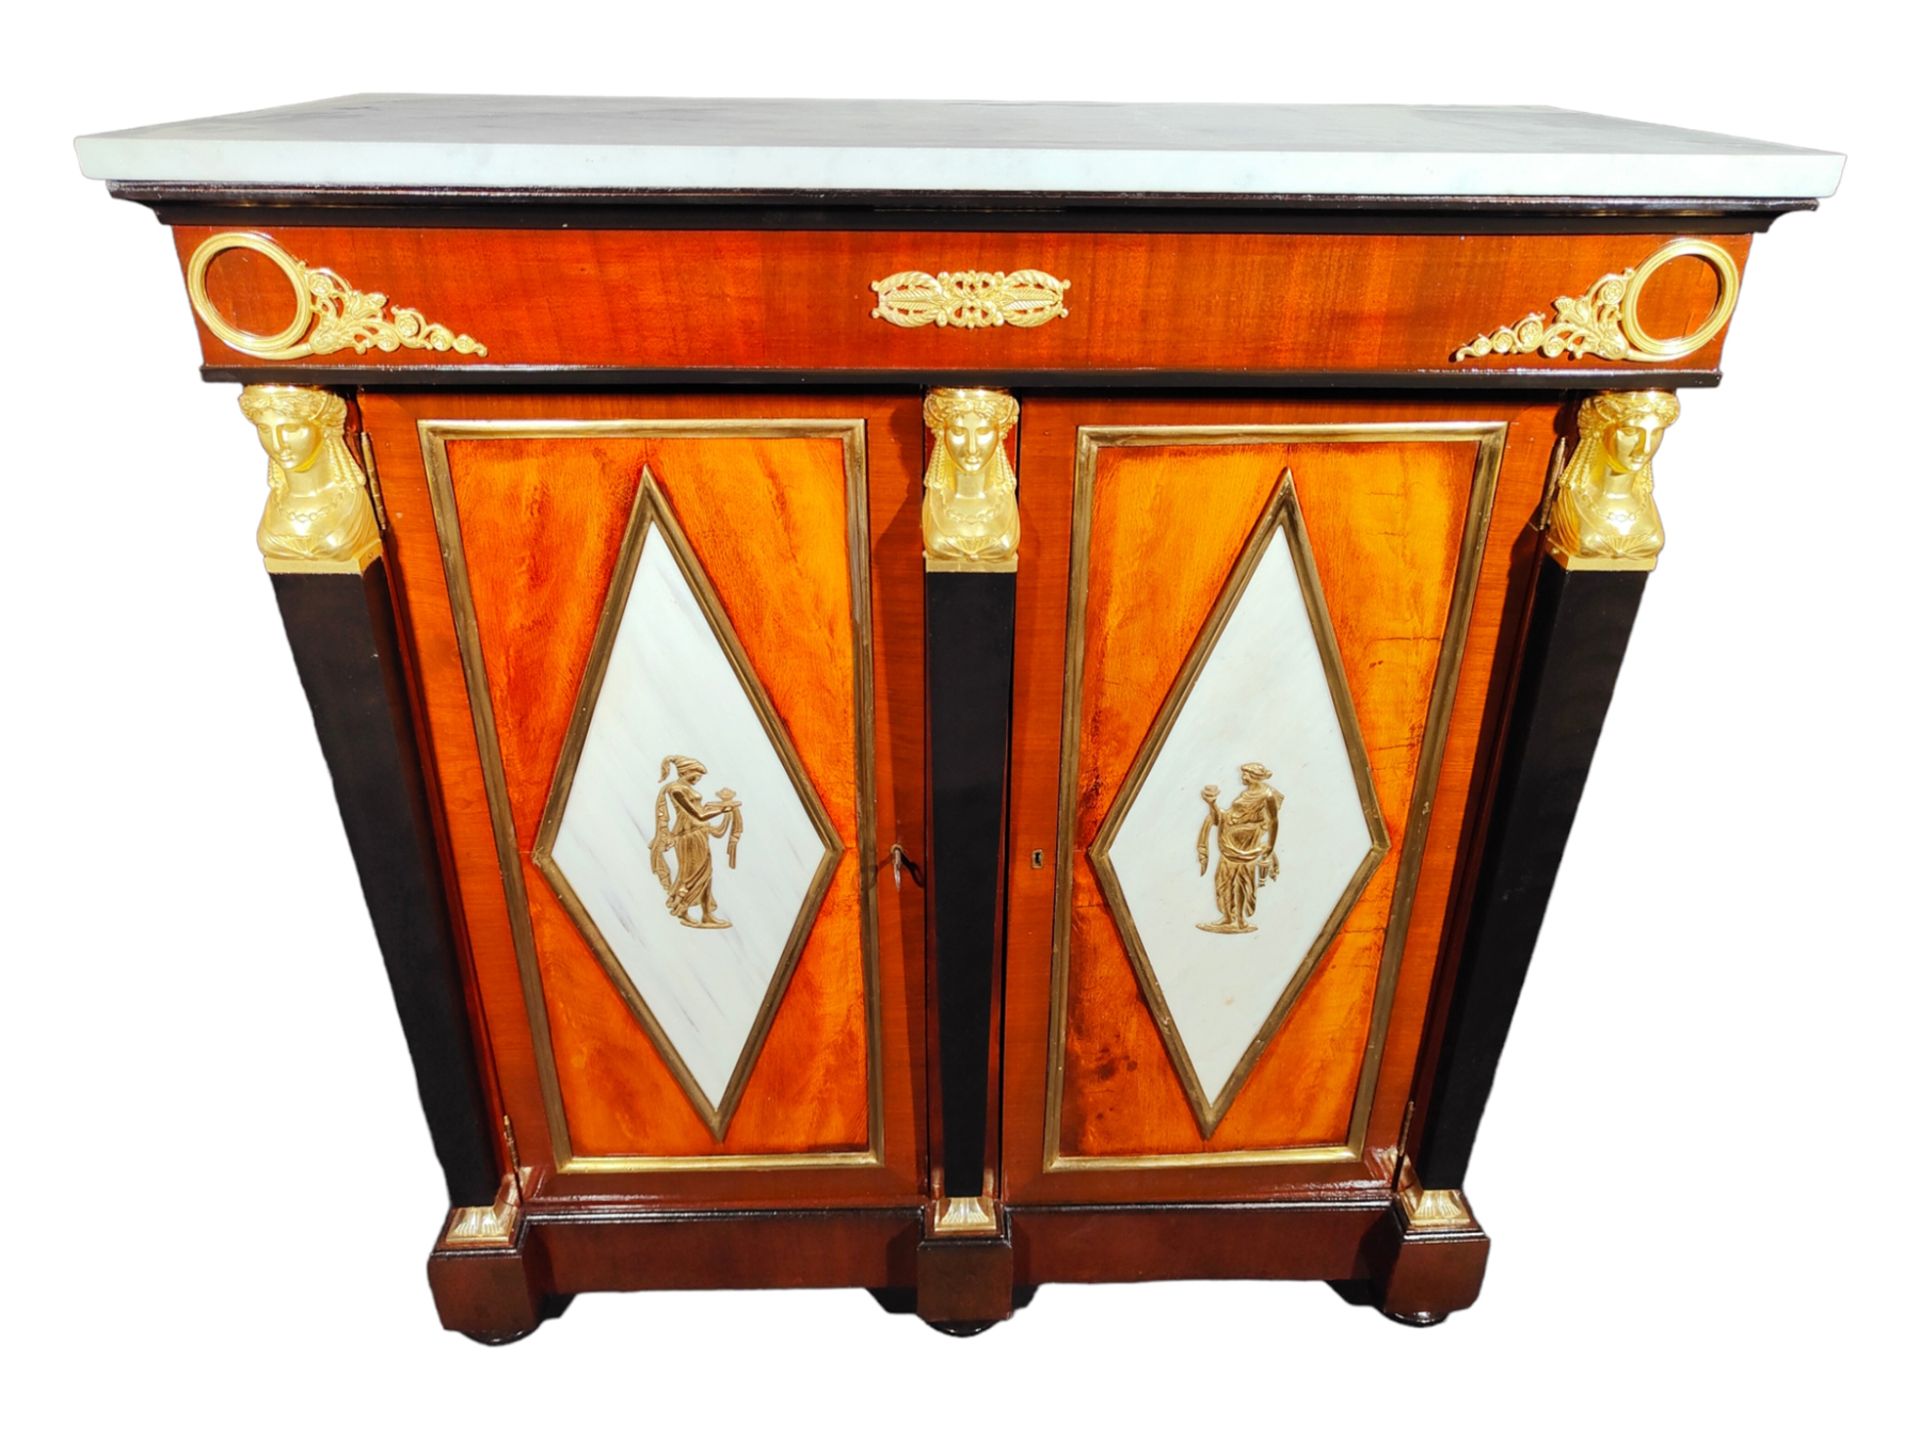 Elegant French Empire style sideboard, 19th century - Image 4 of 8